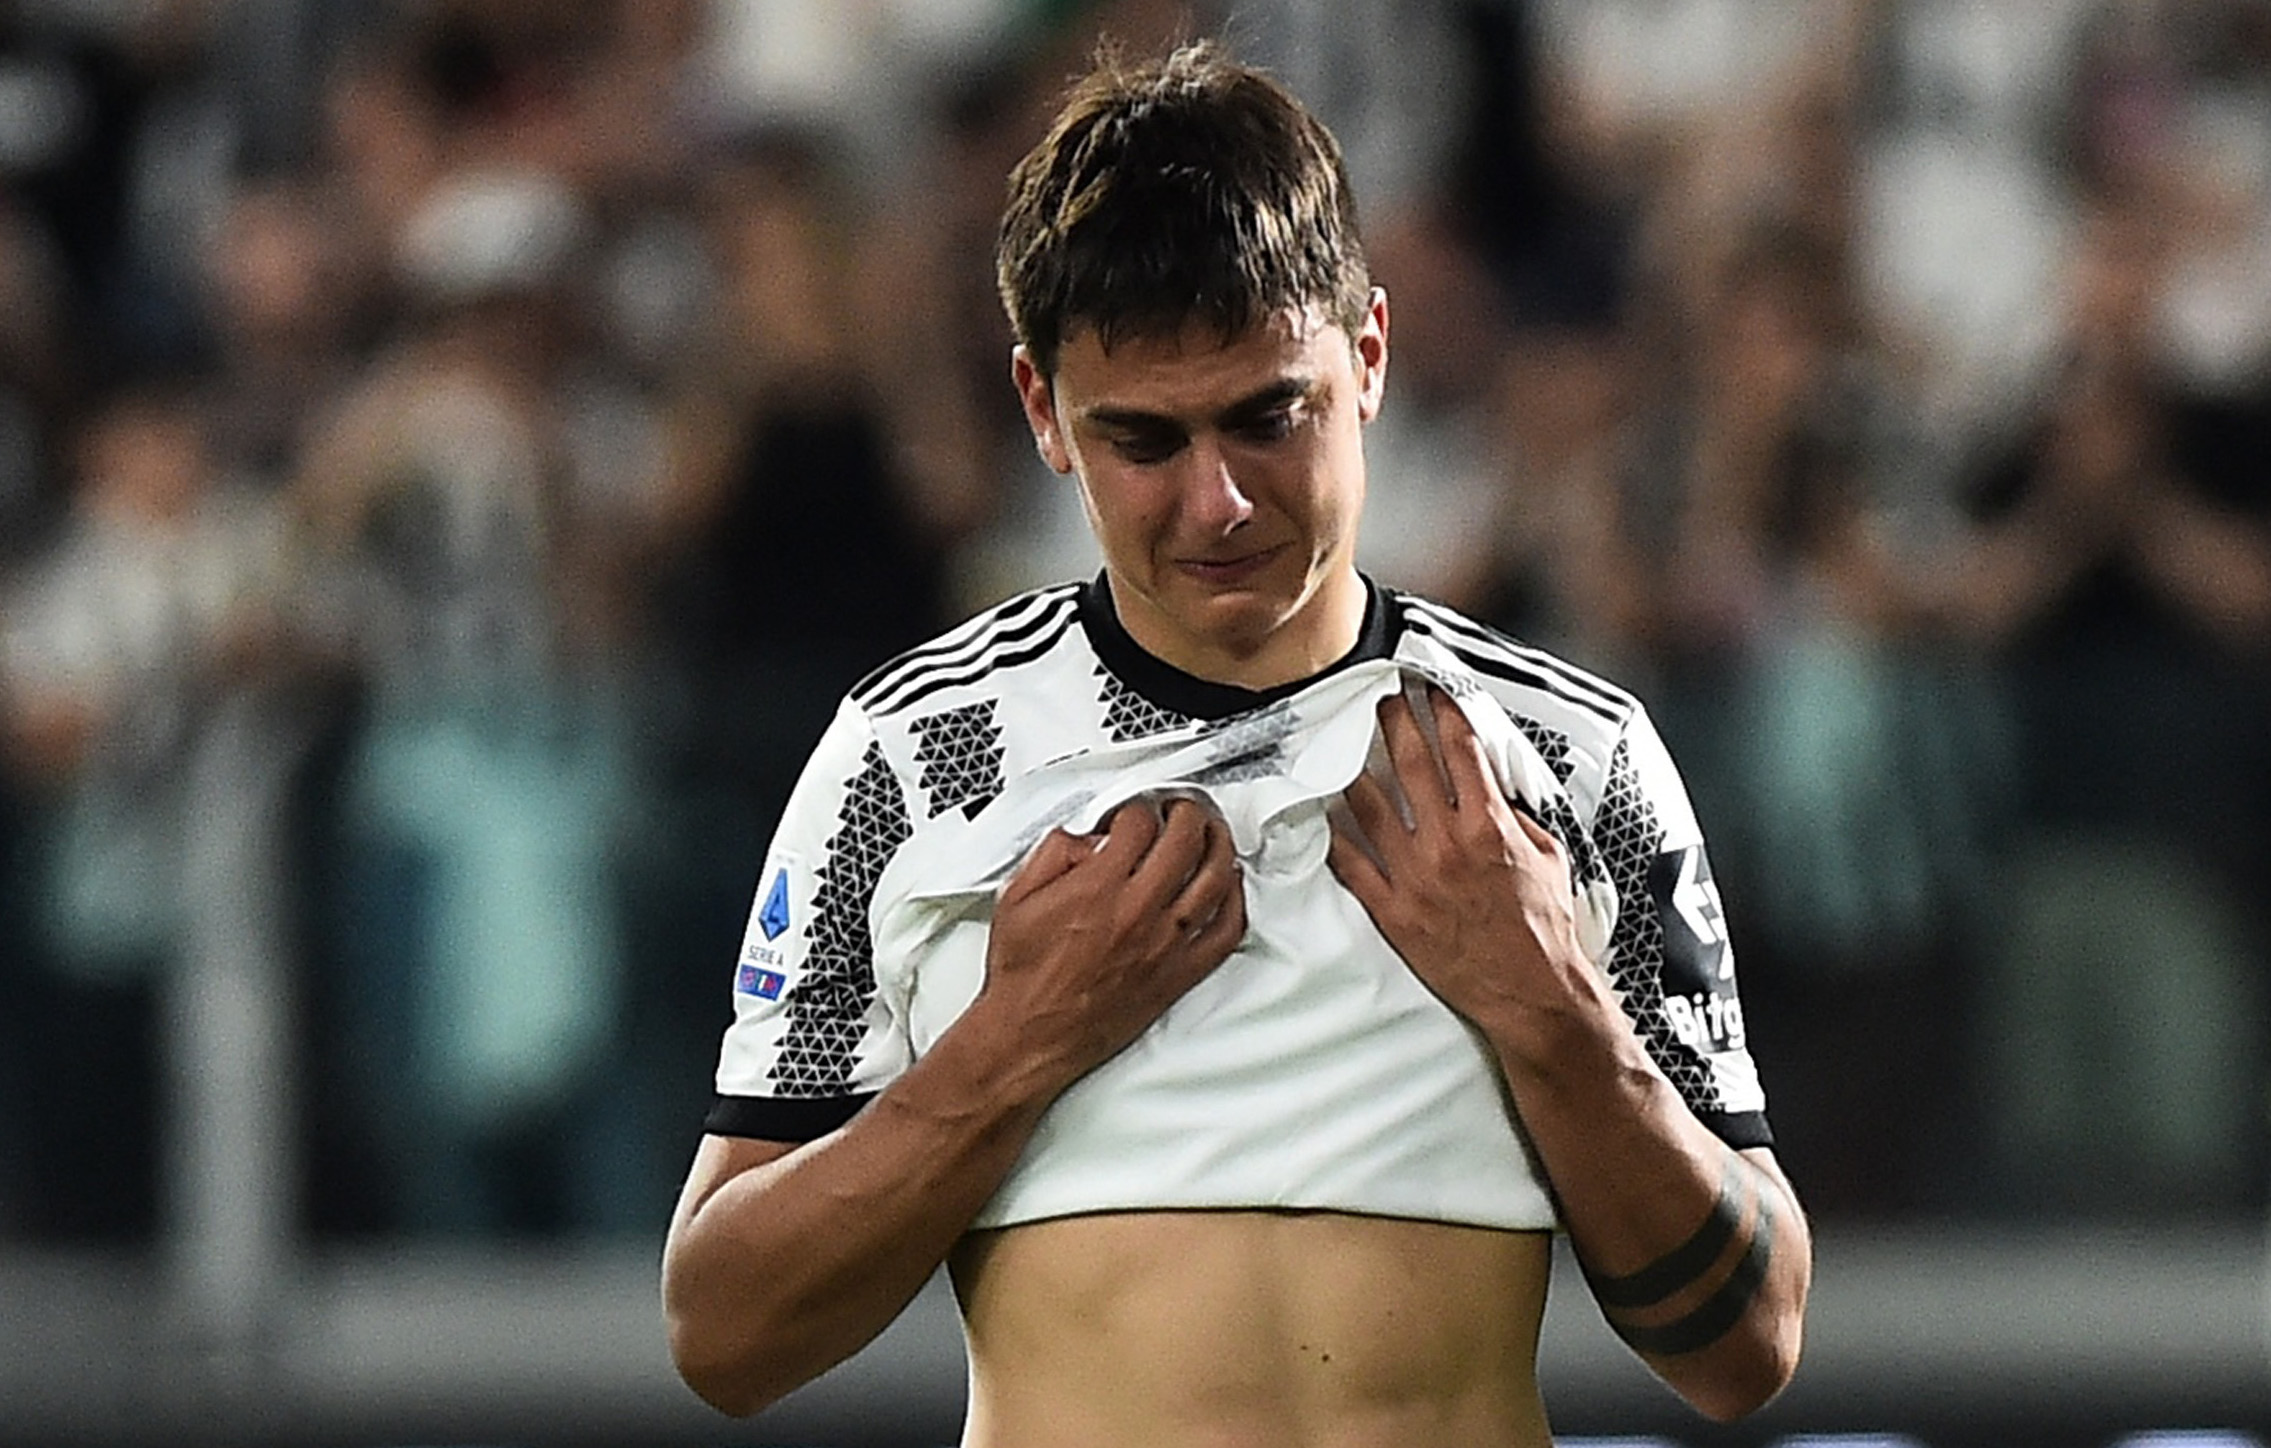 Paulo Dybala bids tearful farewell to Juventus as speculation over his next move intensifies